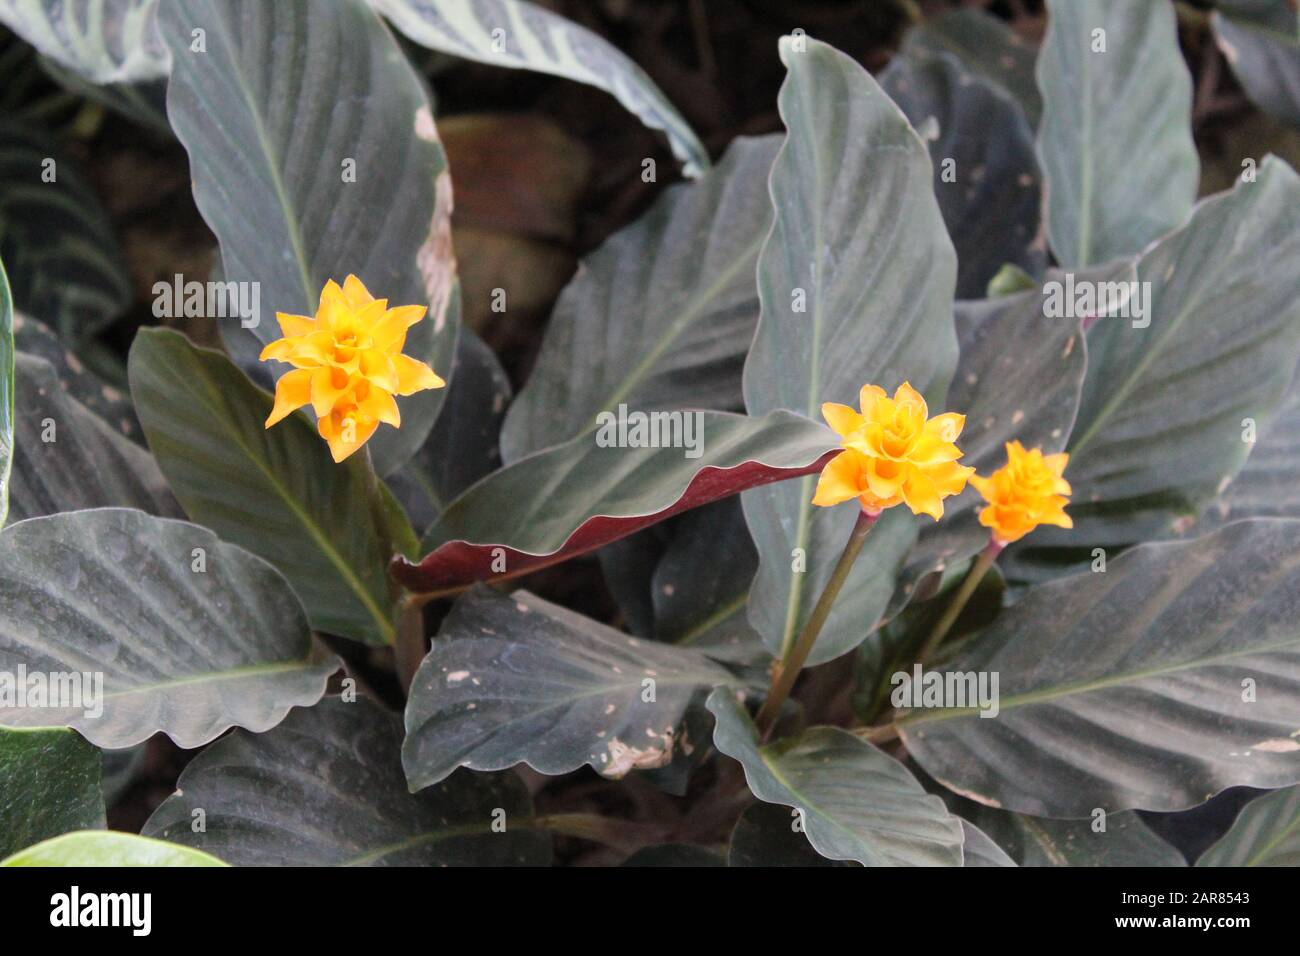 Close up of small yellow flowers against dark leaves Stock Photo